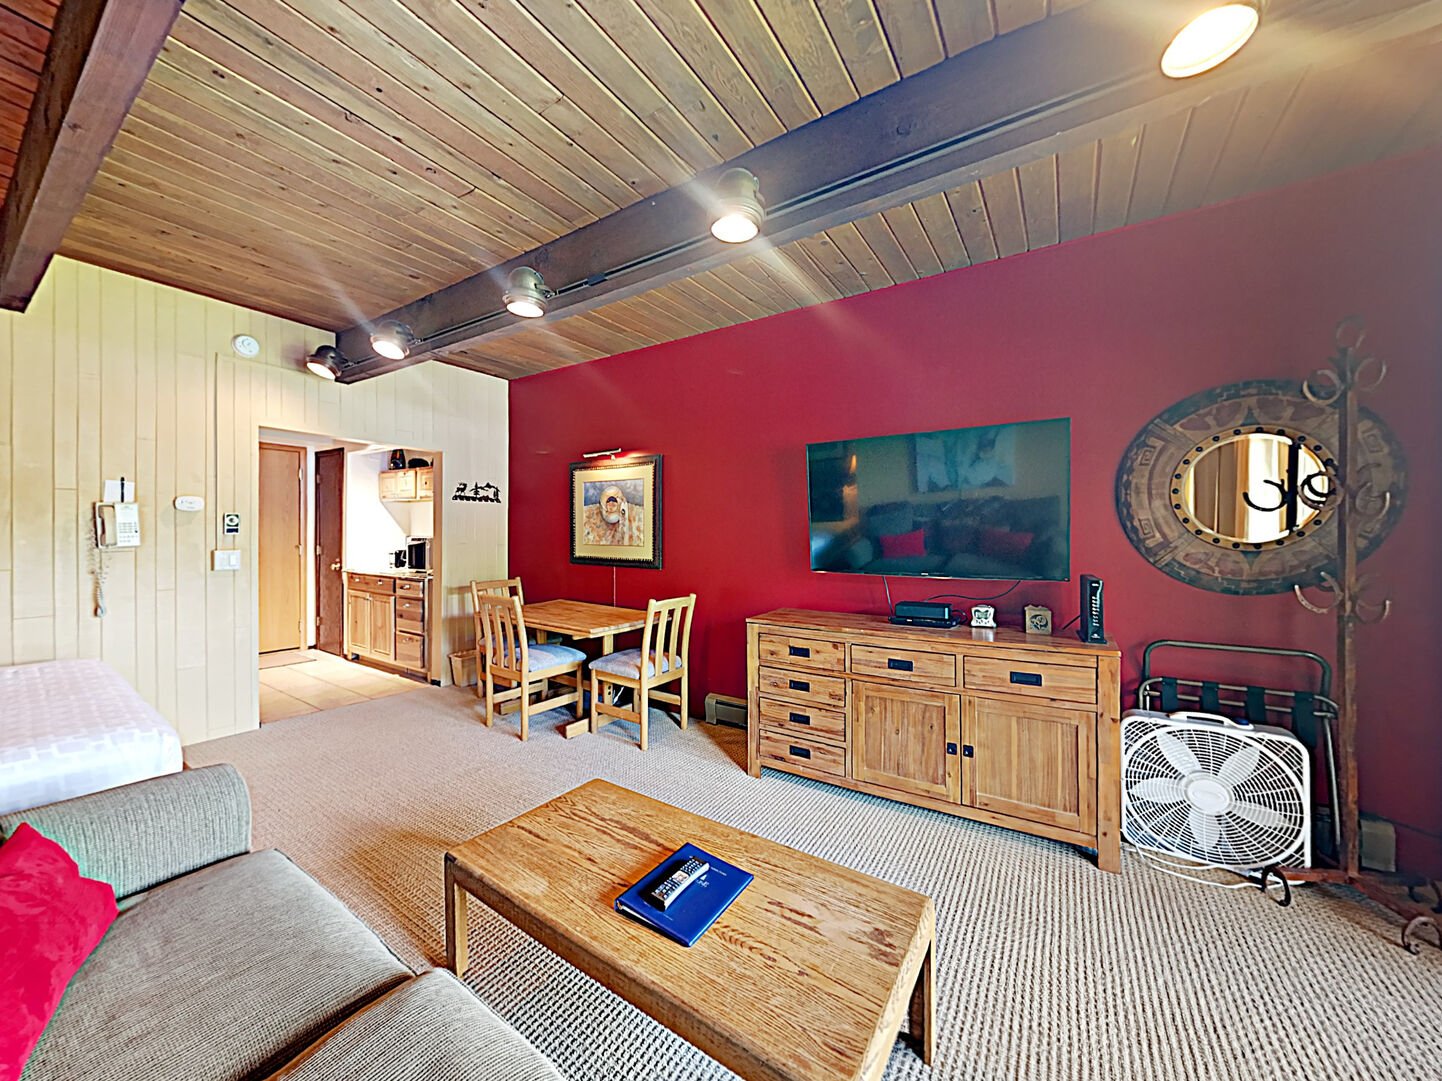 The interior of one of our Snowmass spring rentals